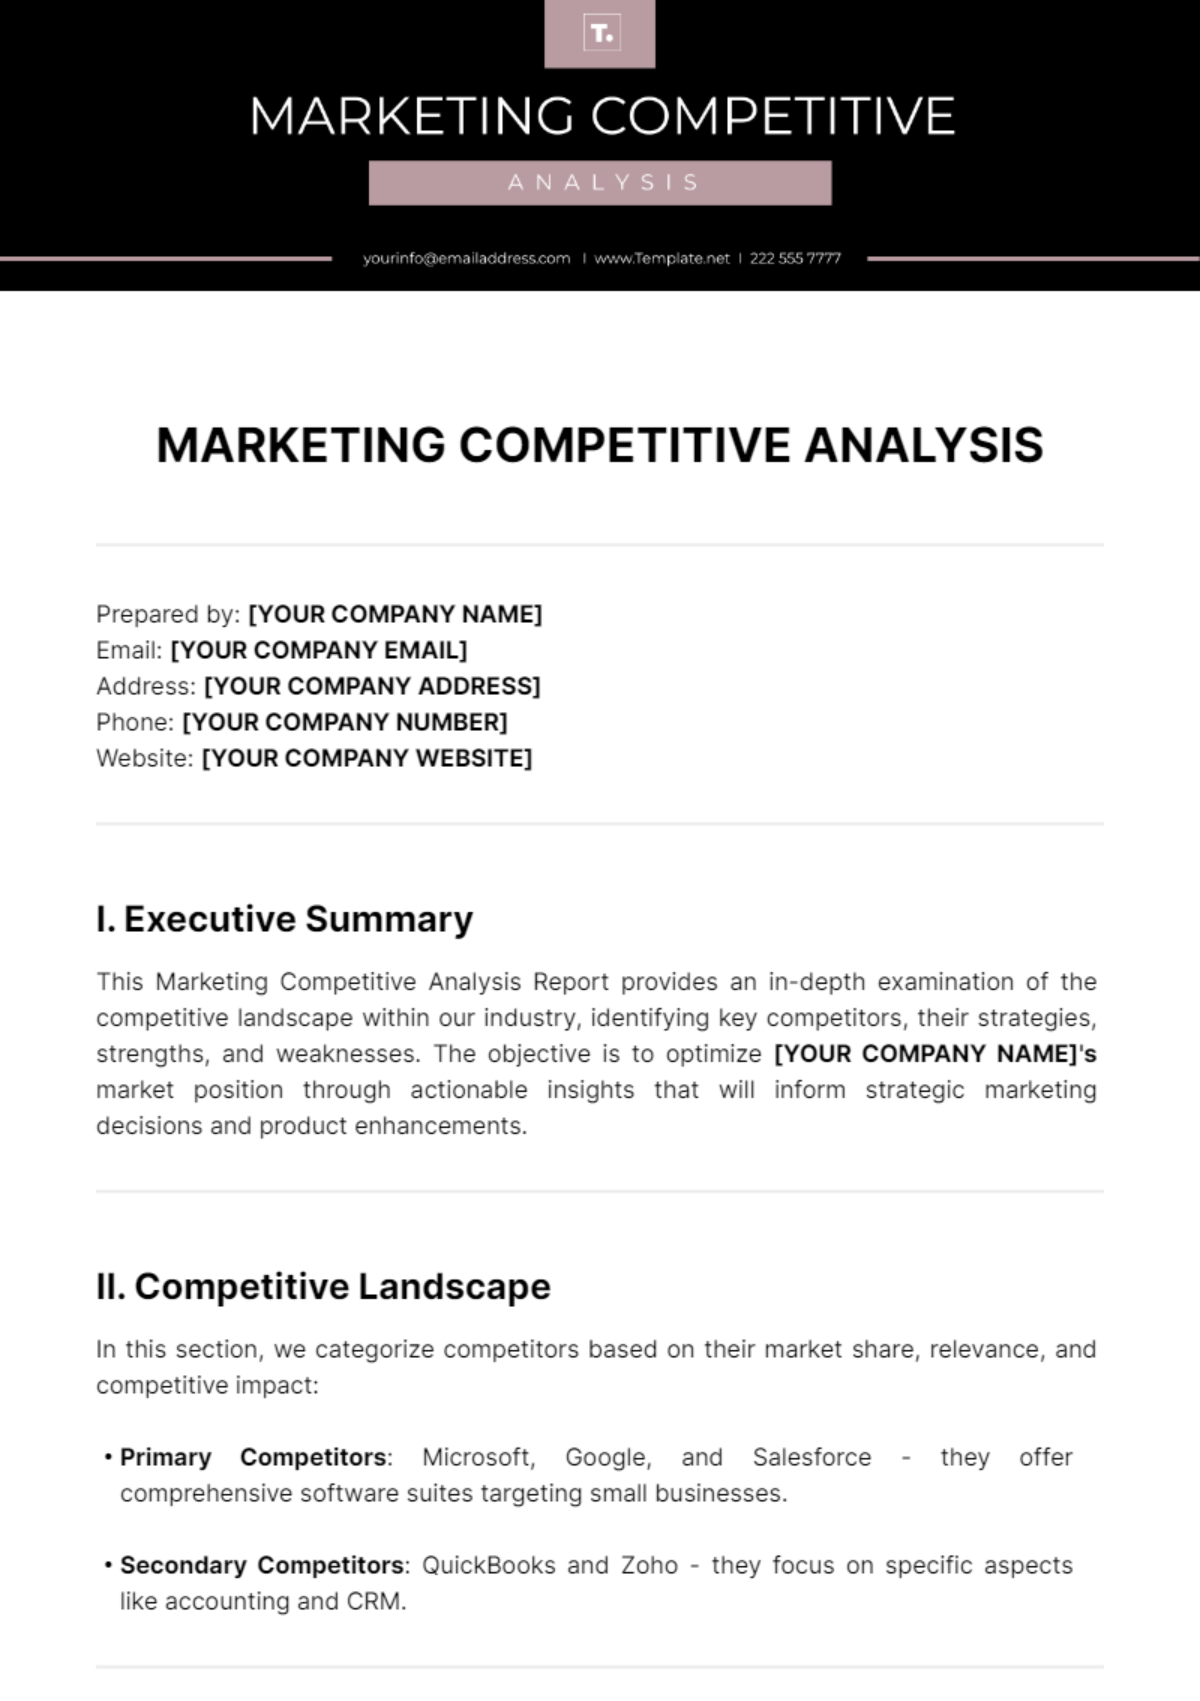 Marketing Competitive Analysis Template